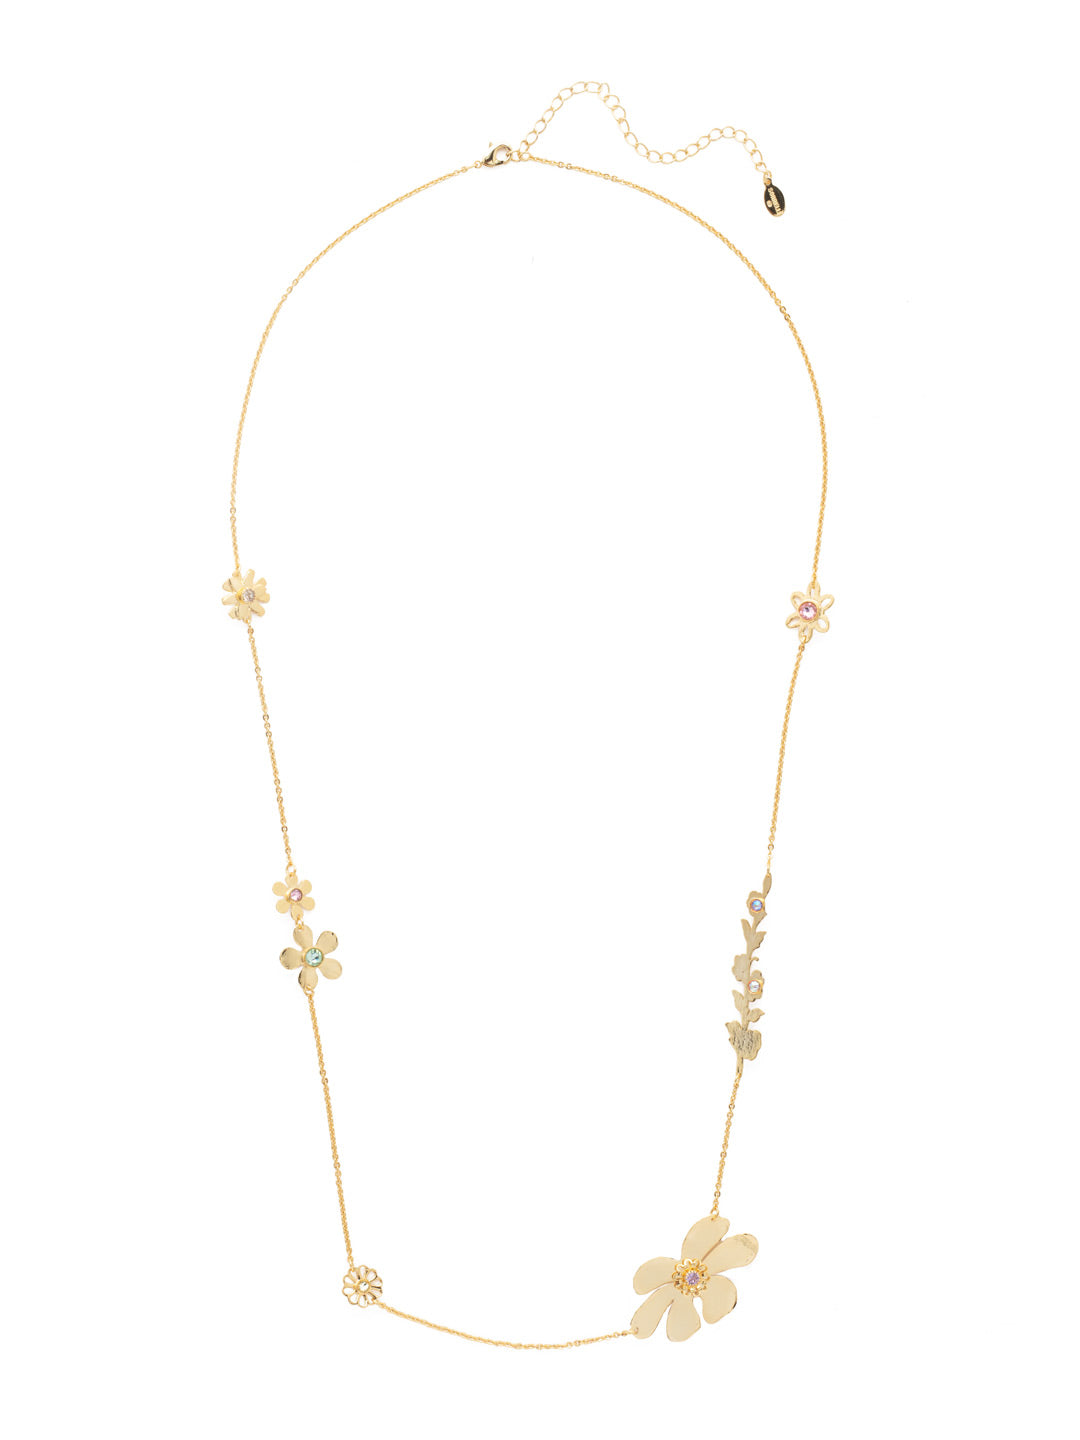 Olivia Long Necklace - NEV2BGSPR - <p>Go big and ring in spring with the Olivia Long Necklace, perfect for layering. It features an assortment of fun metallic floral accents and delicate dots of sparkling crystal stones. From Sorrelli's Spring Rain collection in our Bright Gold-tone finish.</p>